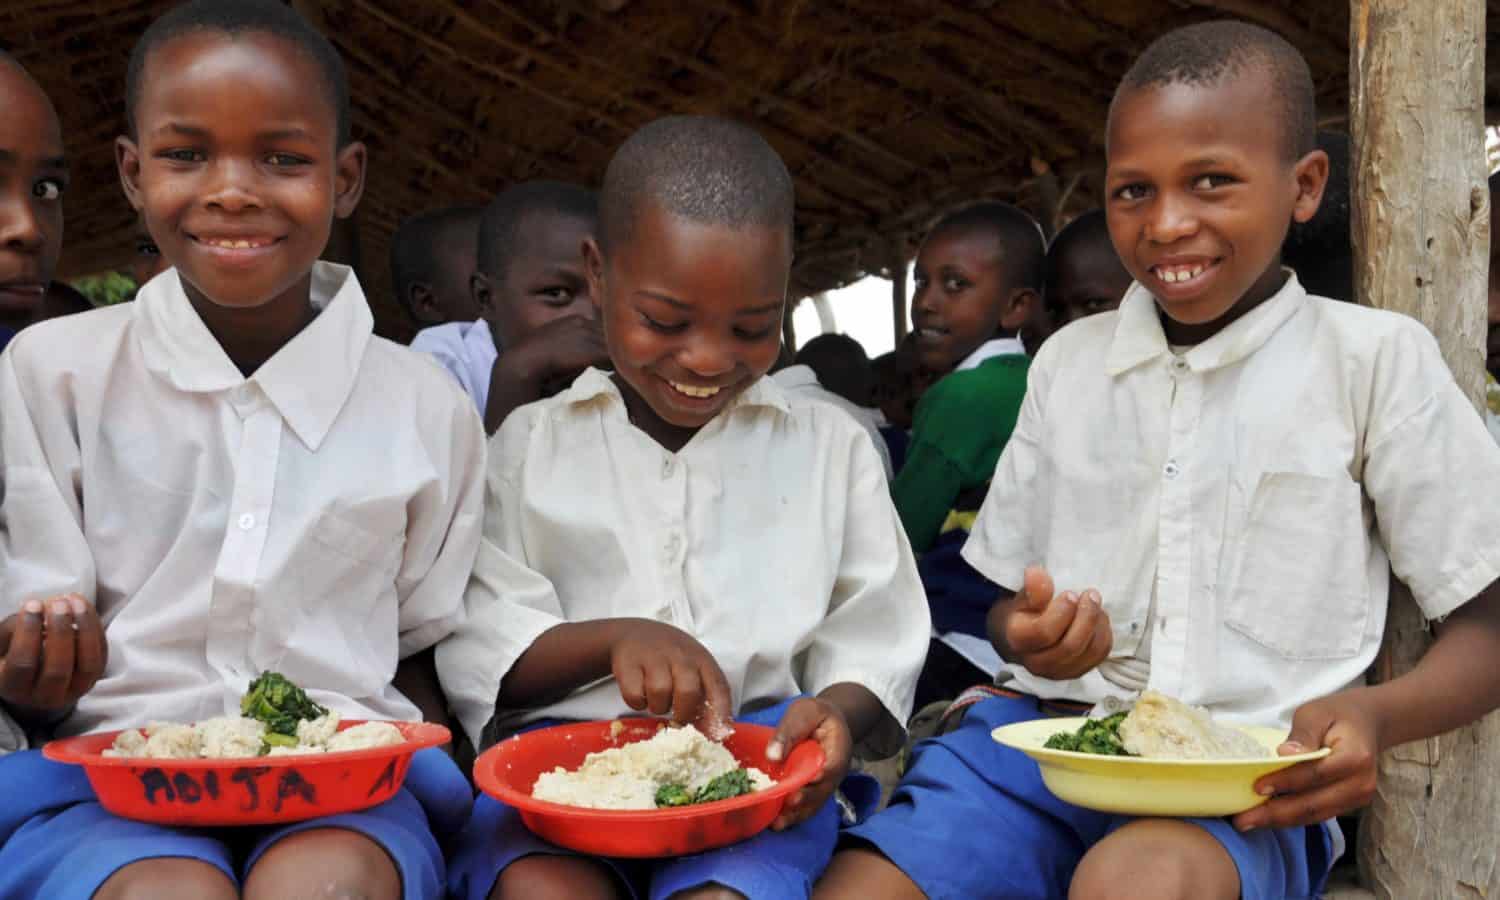 In Nairobi, Kenya, the World Food Programme has piloted a project to include aesthetically rejected ugly vegetables in school meals.